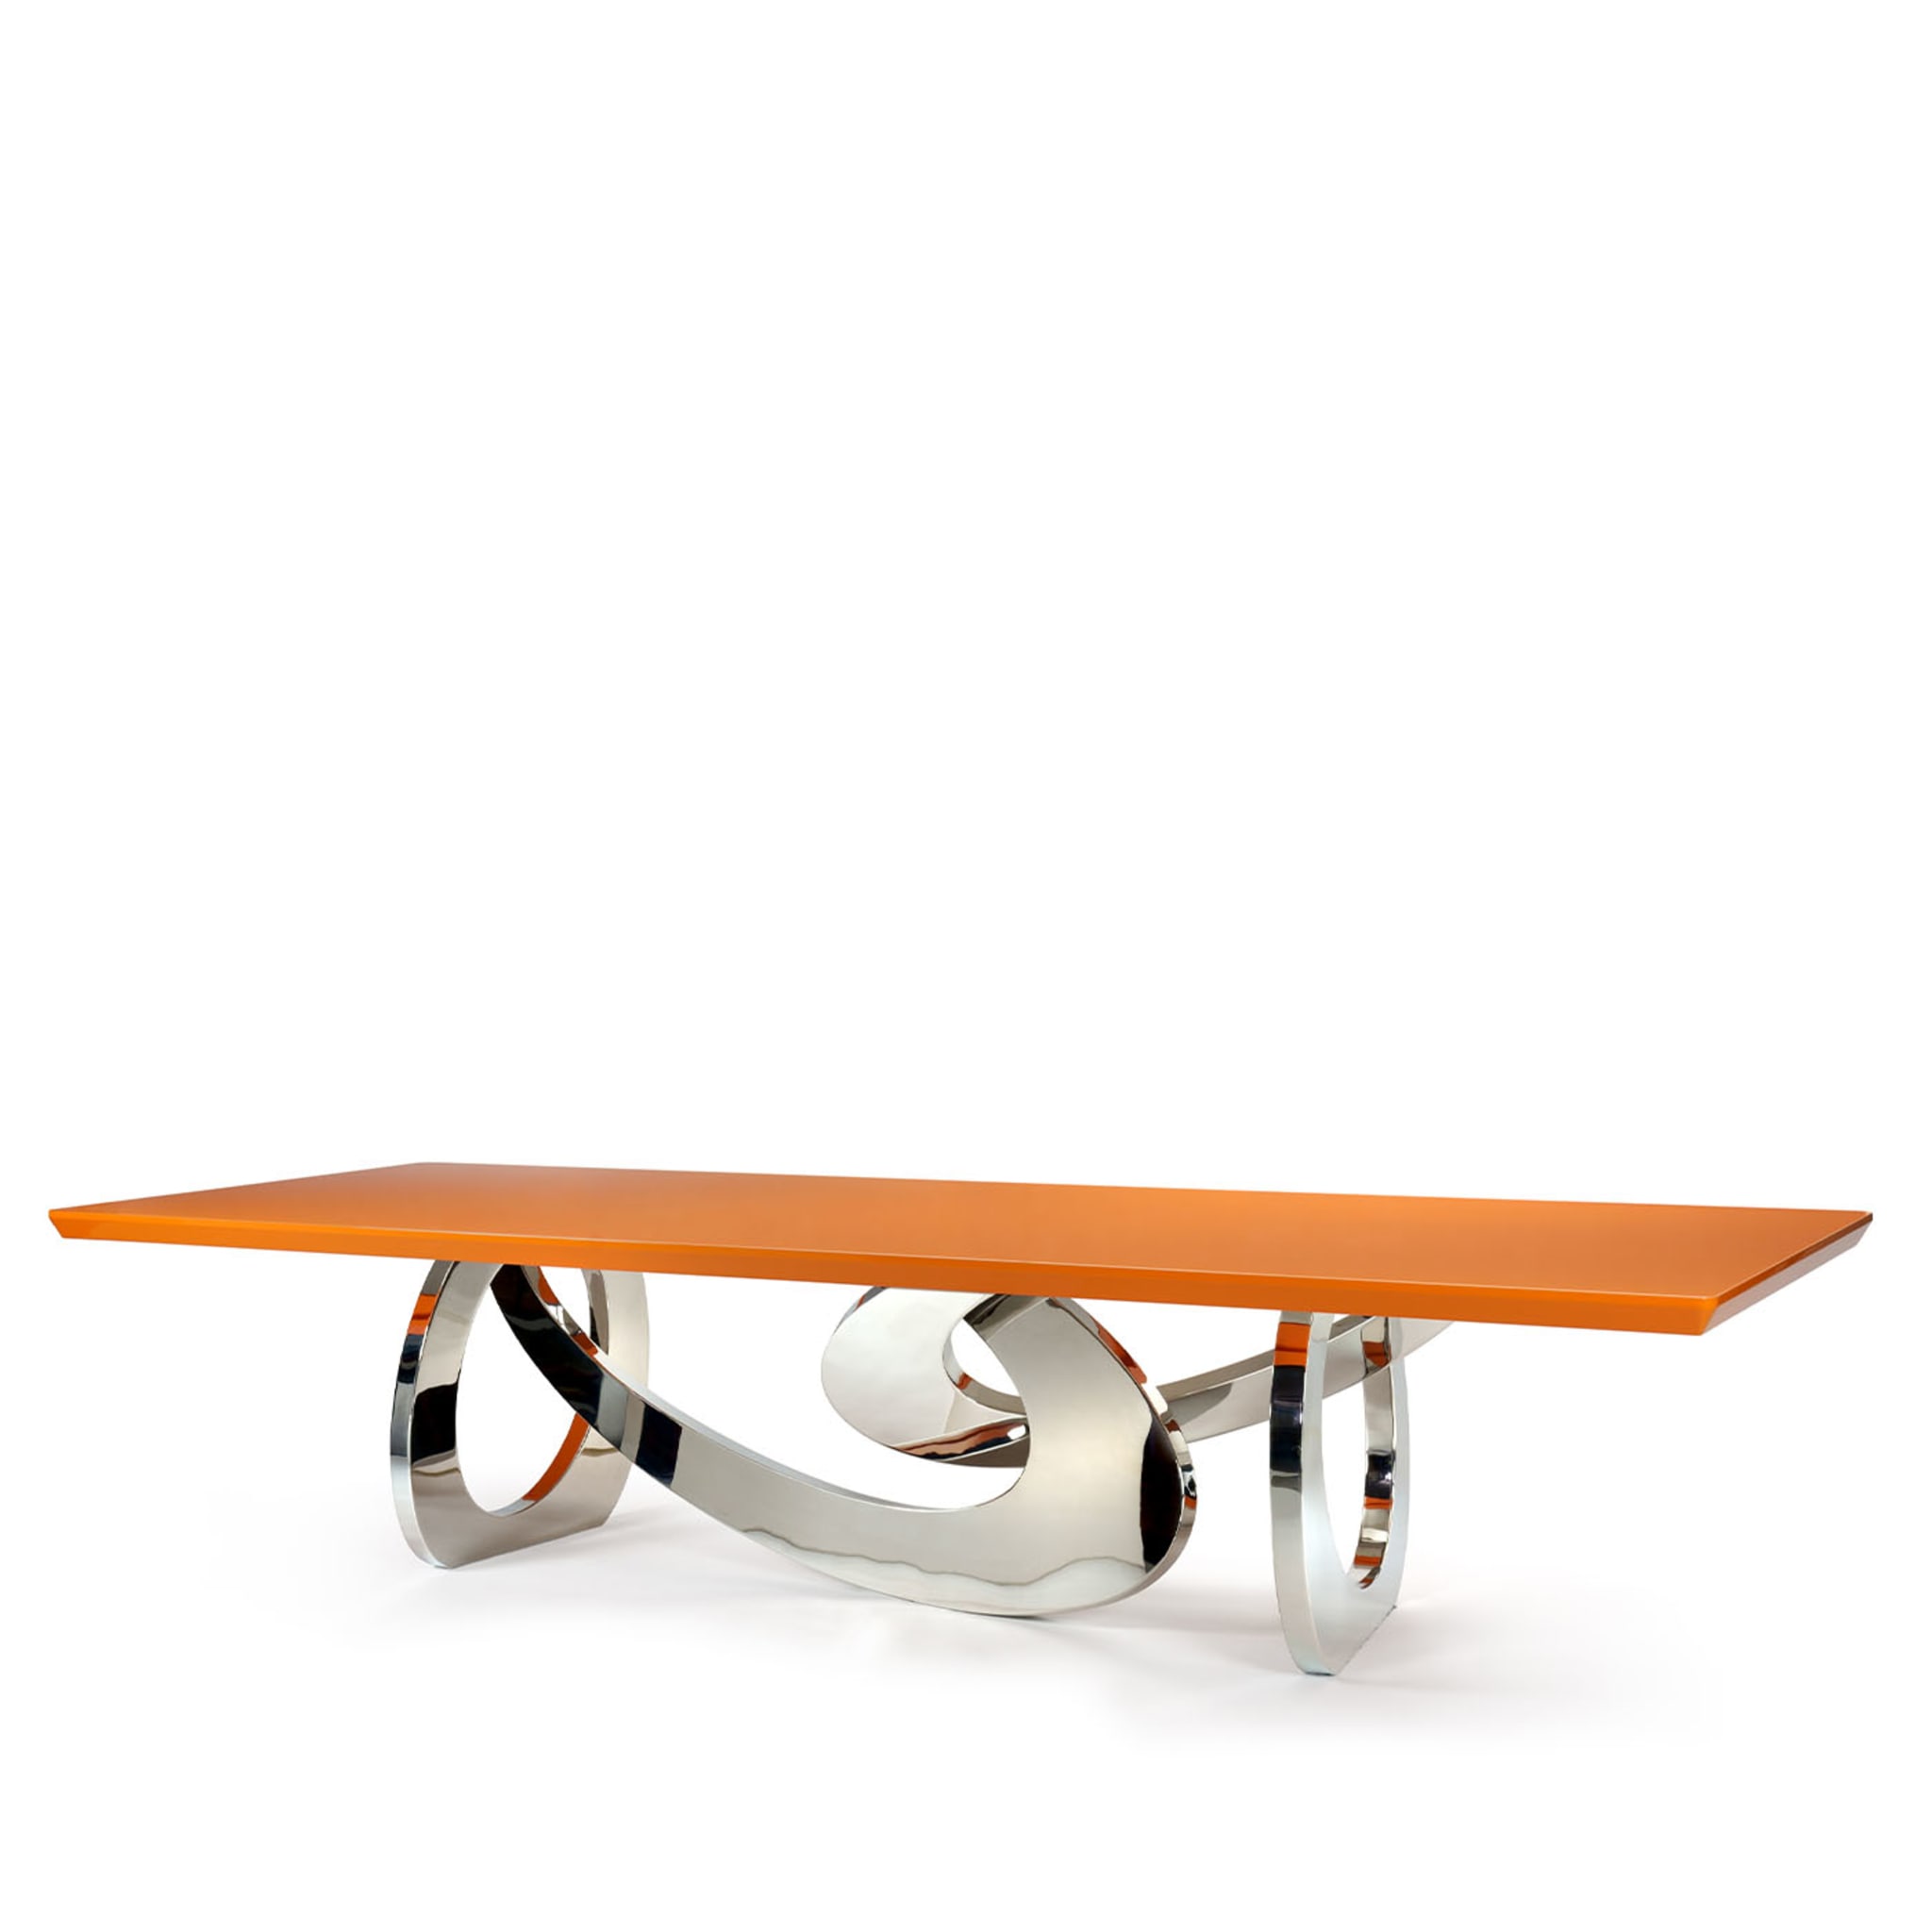 Bangles House of Gucci Dining Table - Alternative view 3